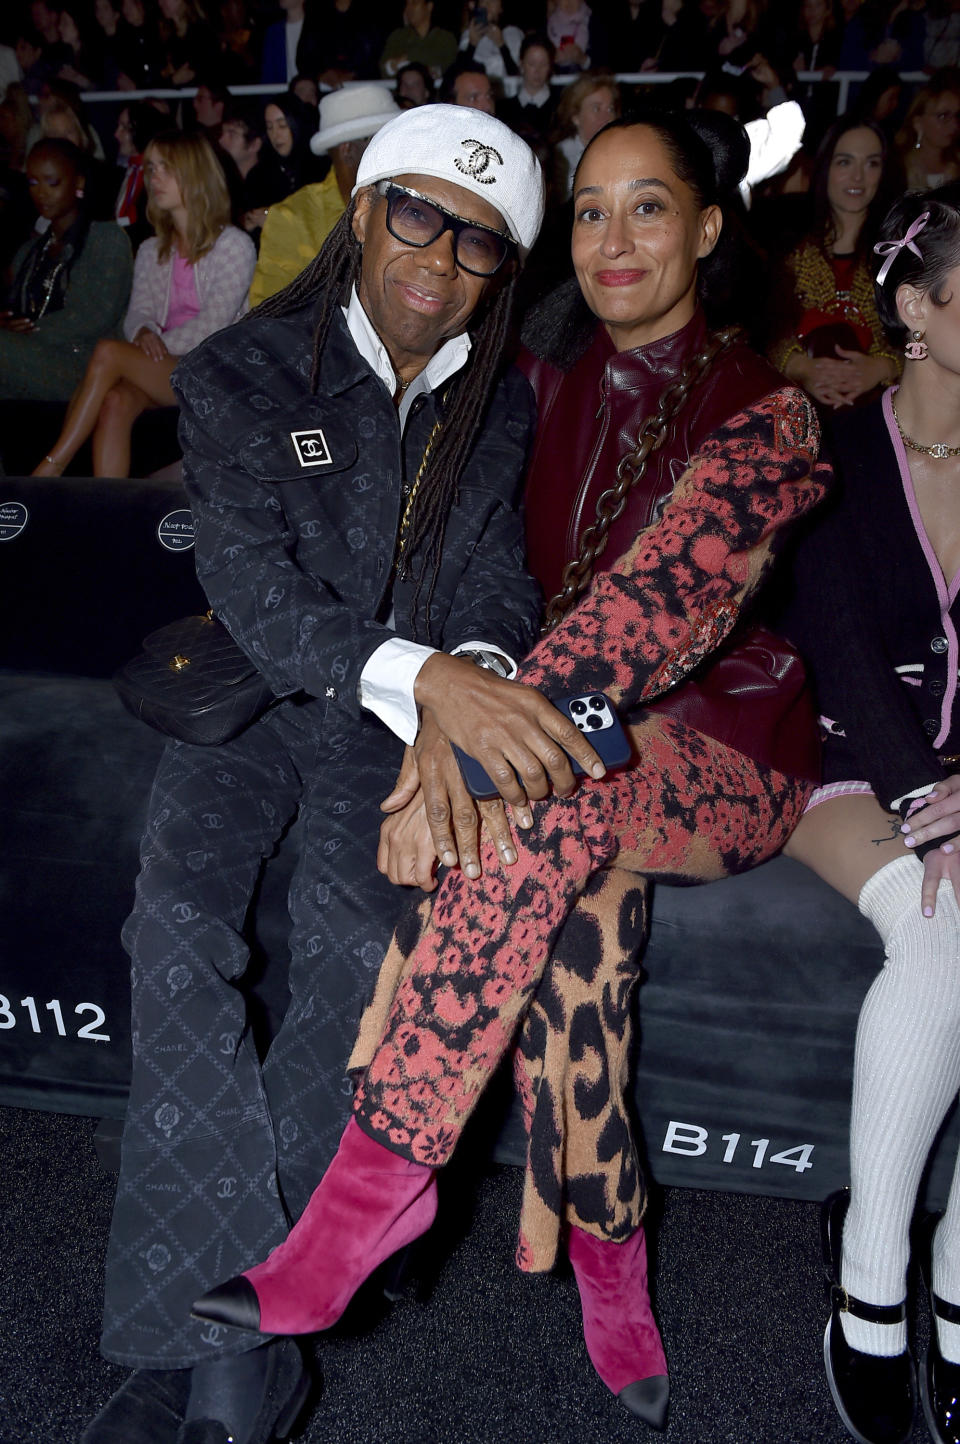 Nile Rodgers, left, and Tracee Ellis Ross attend the Chanel Cruise 2023/2024 Fashion Show on Tuesday, May 9, 2023, at Paramount Studios in Los Angeles. (Photo by Jordan Strauss/Invision/AP)